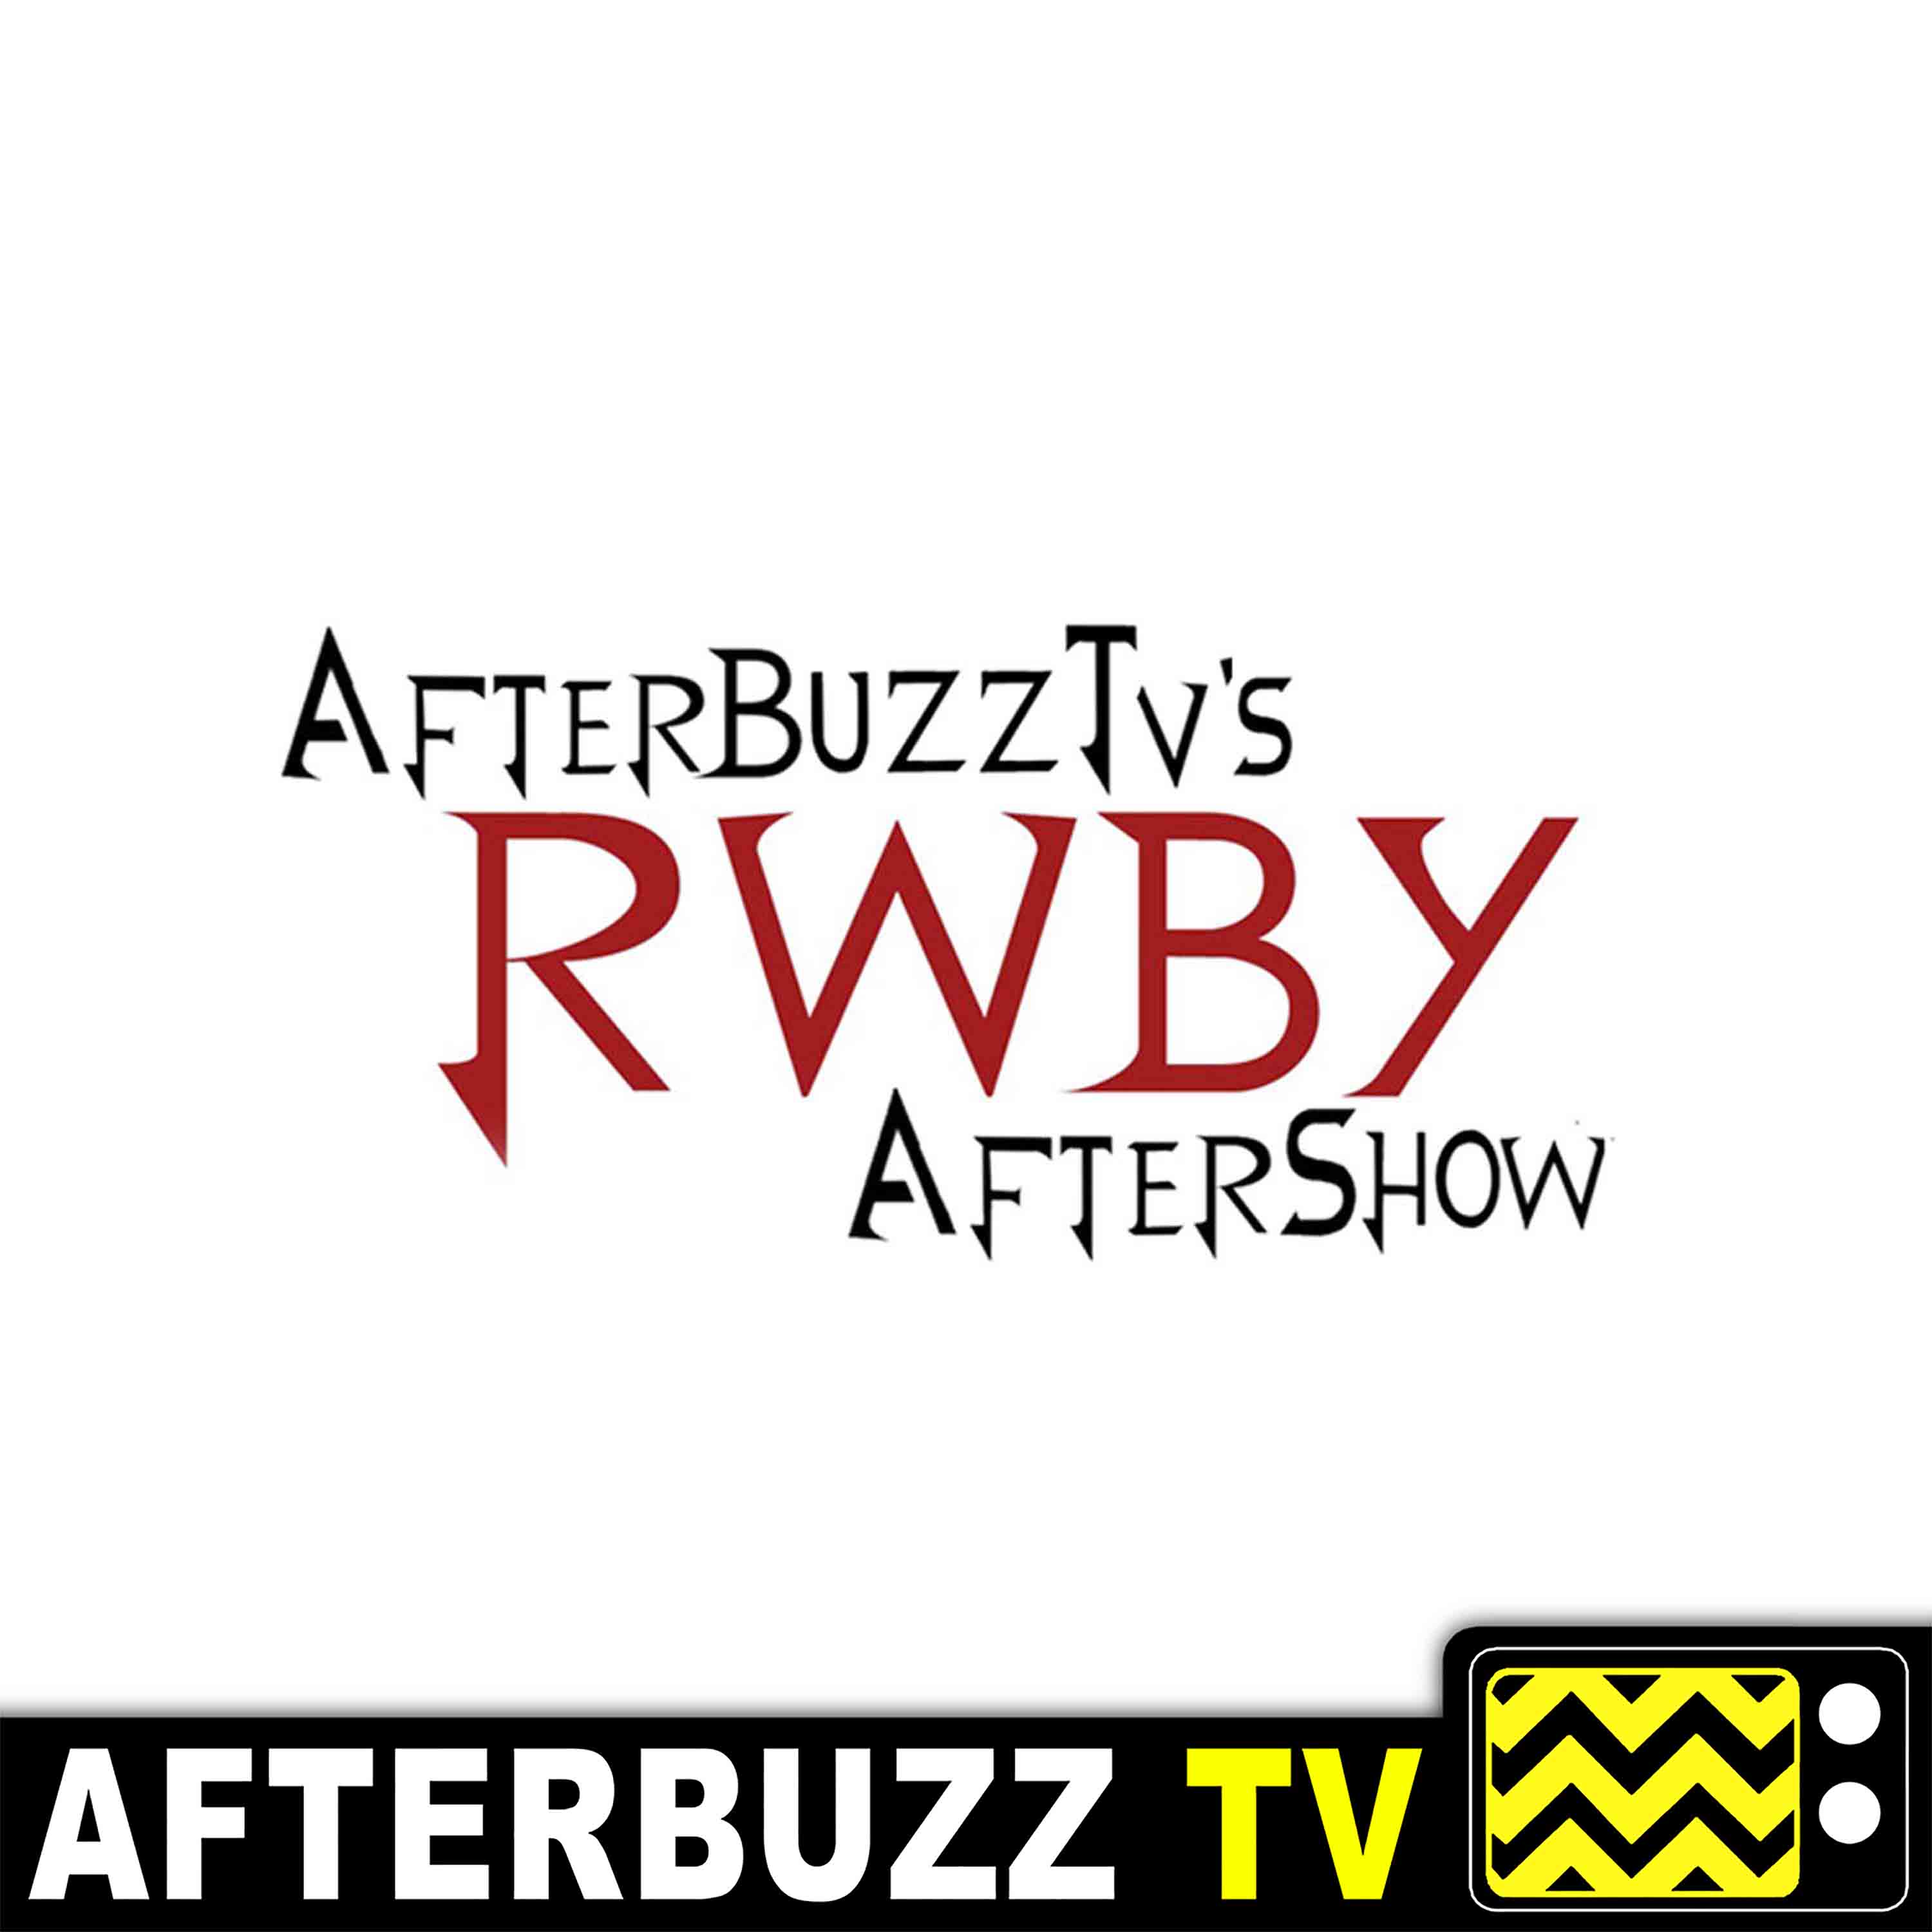 RWBY S:5 | Downfall E:13 | AfterBuzz TV AfterShow